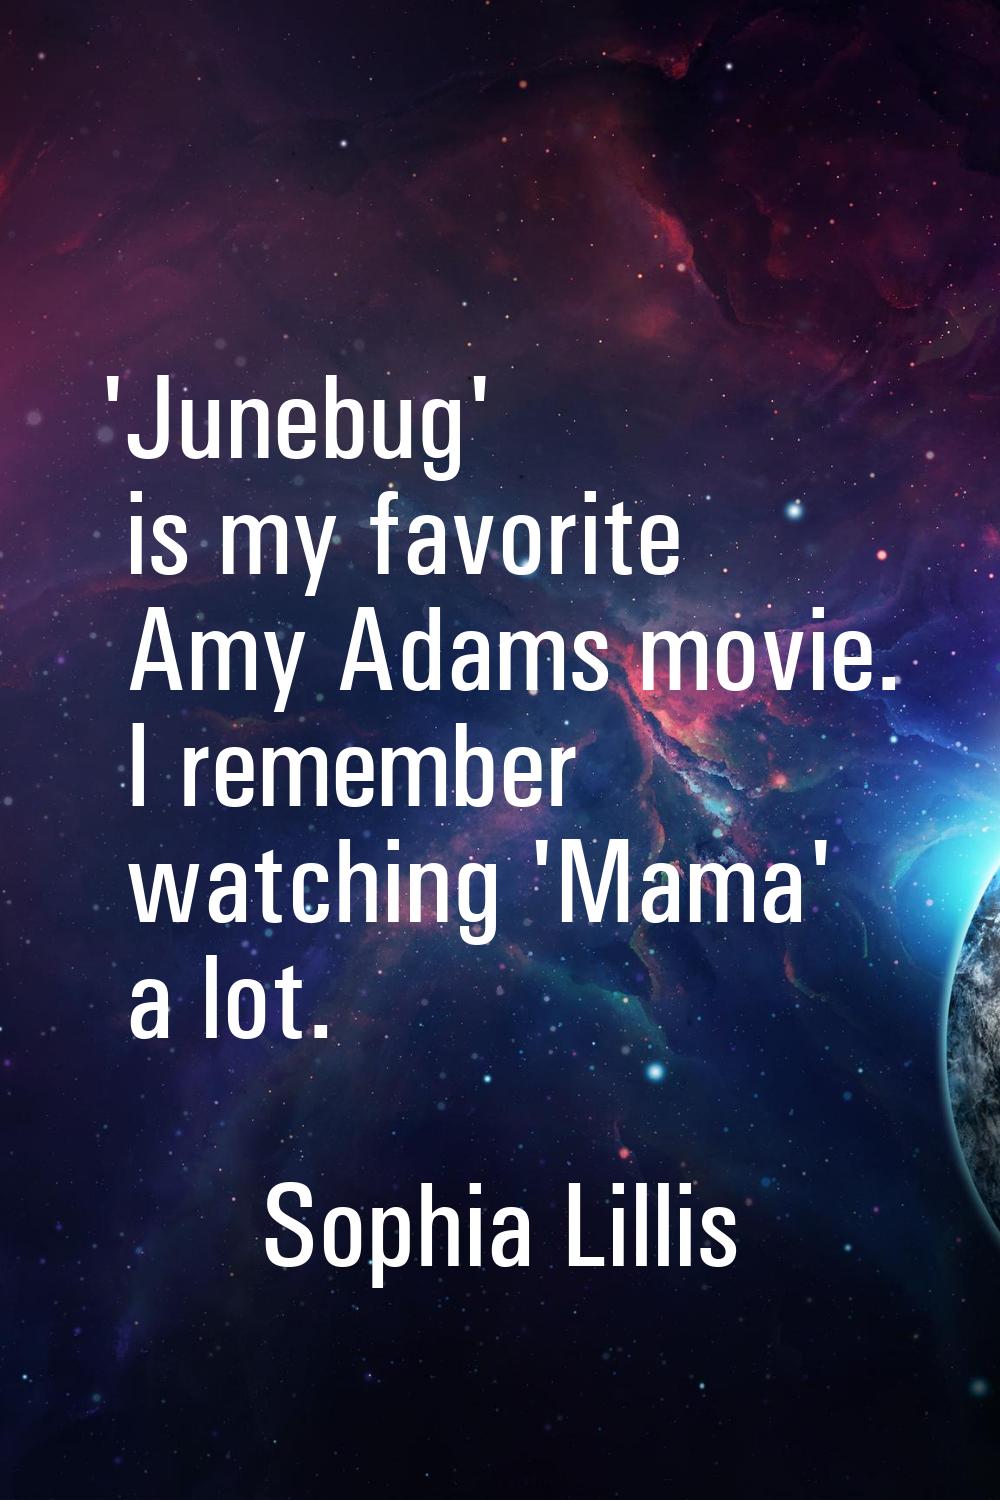 'Junebug' is my favorite Amy Adams movie. I remember watching 'Mama' a lot.